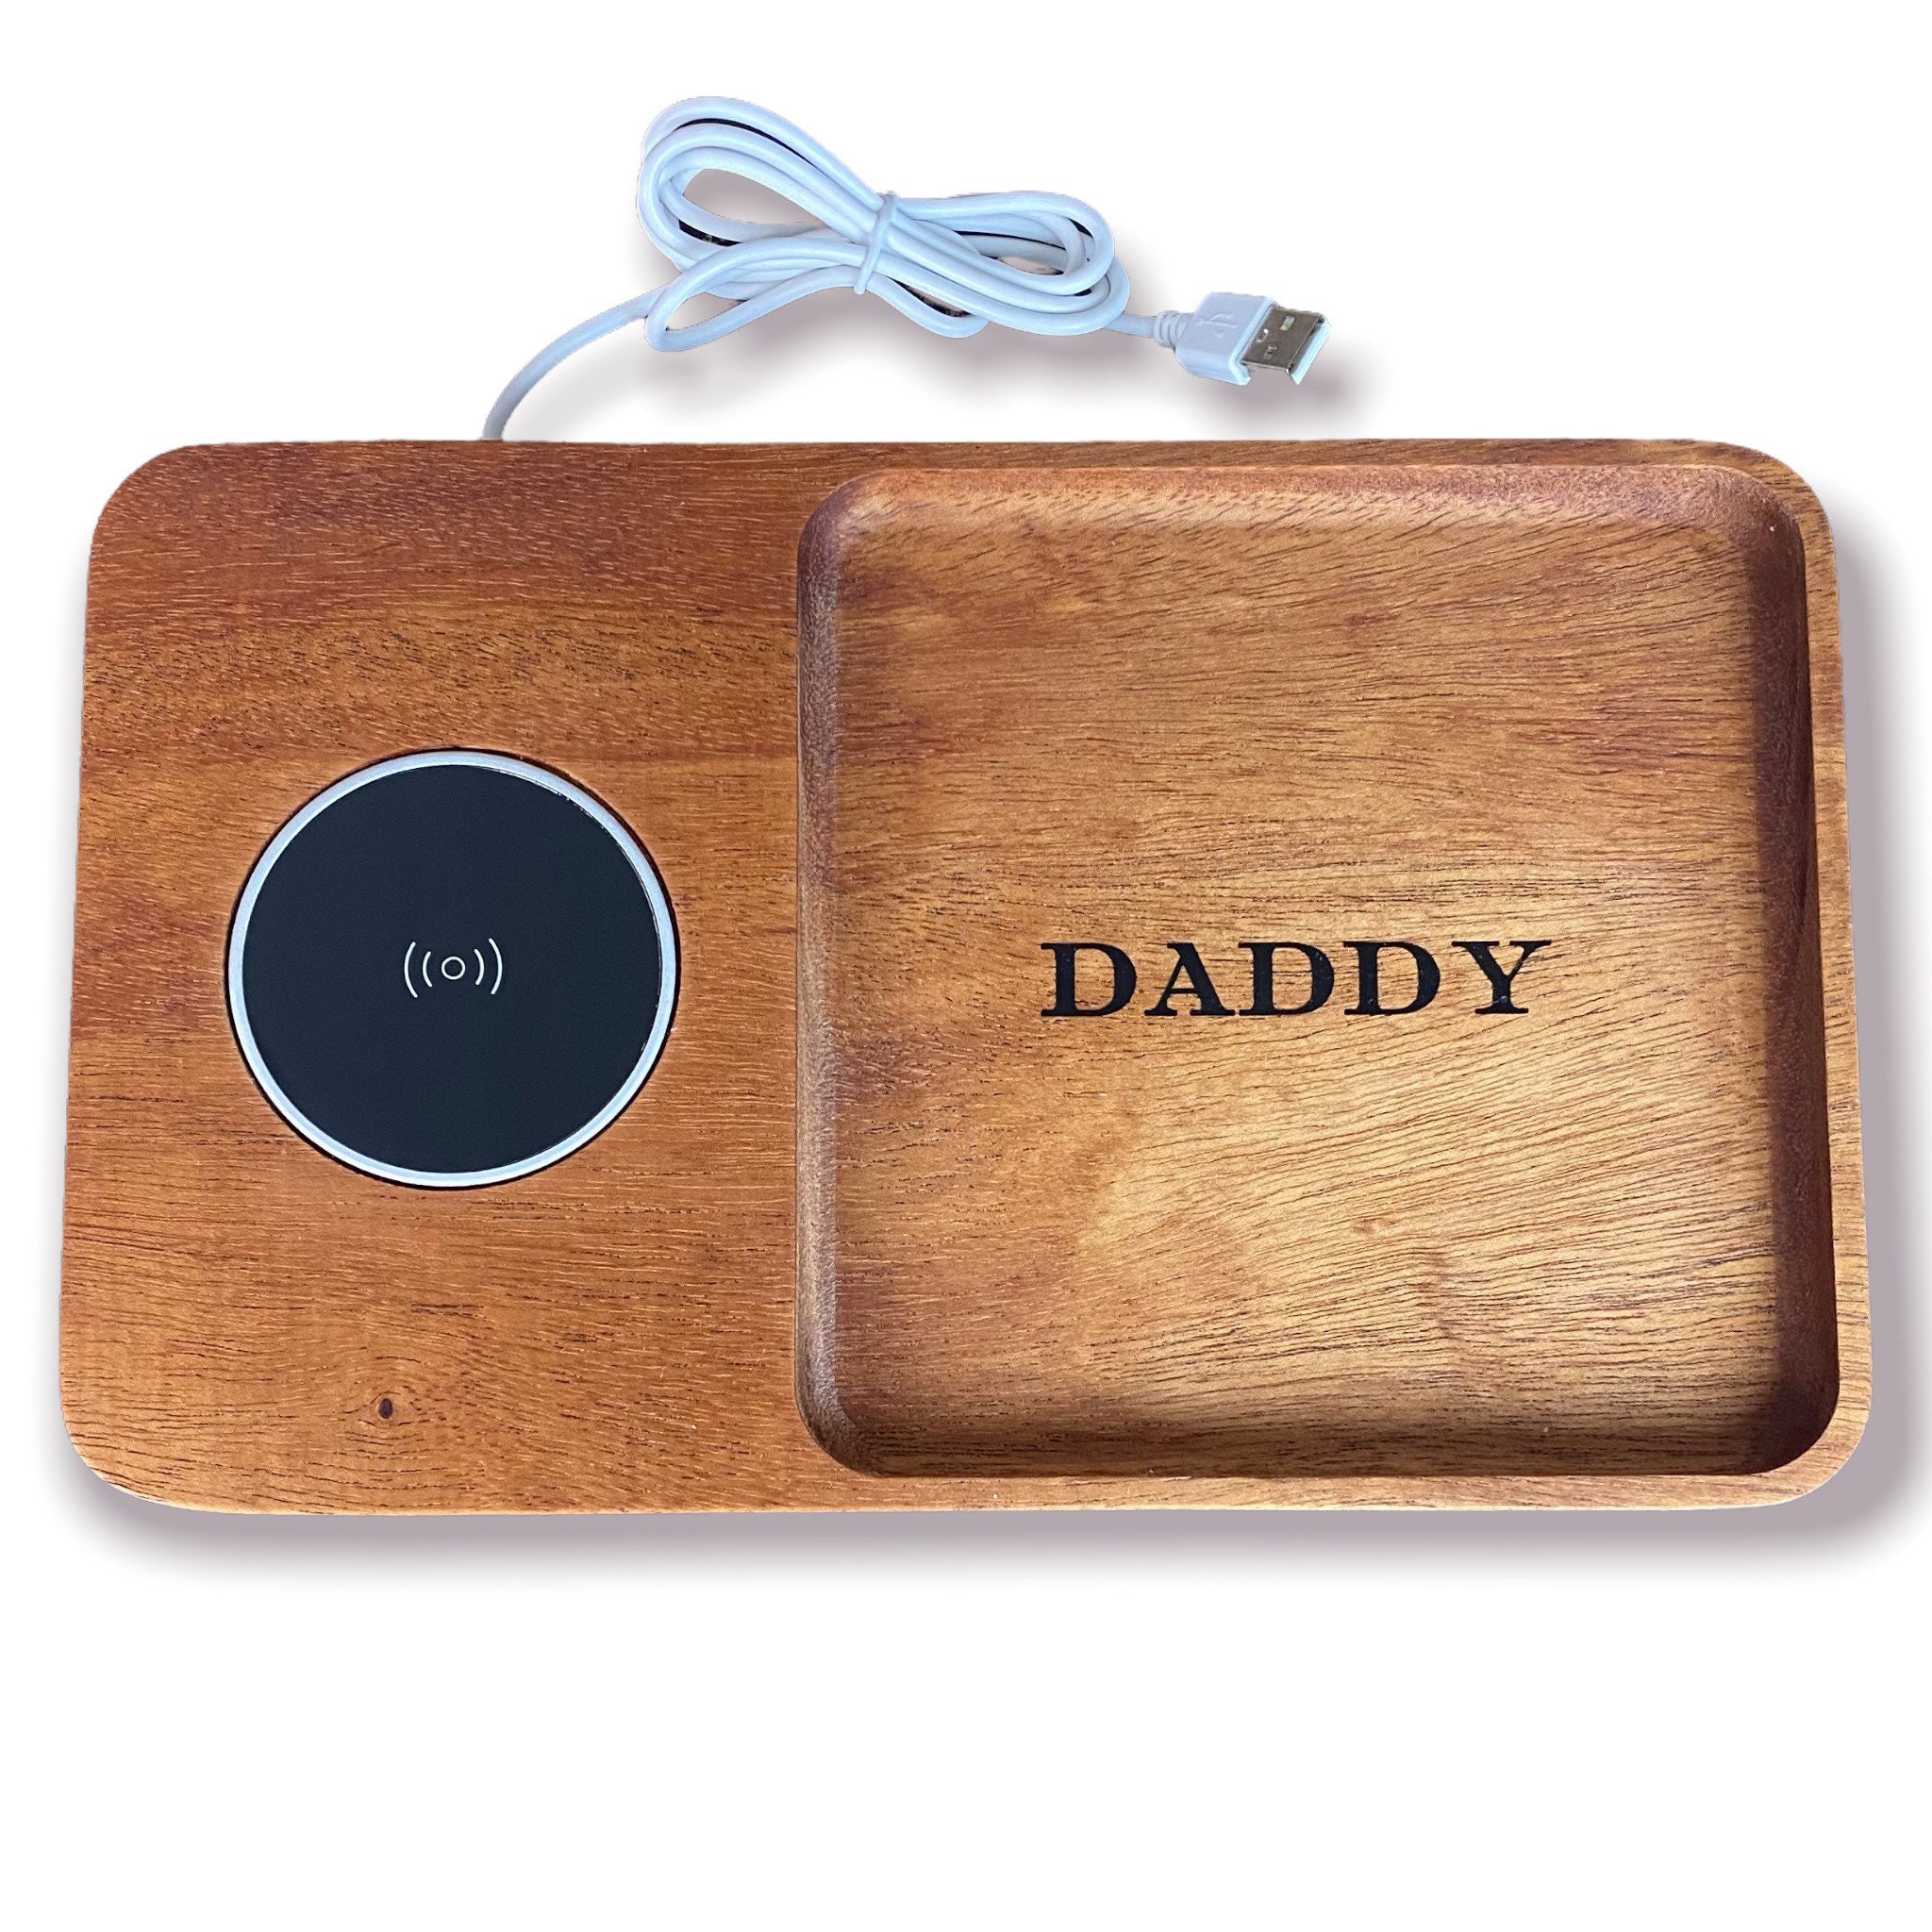 Jpfezry Best Dad Ever Gifts for Father from Daughter Wife Son Kids-PU  Leather Tray with Key Chain,Father's Day,Birthday Gift for